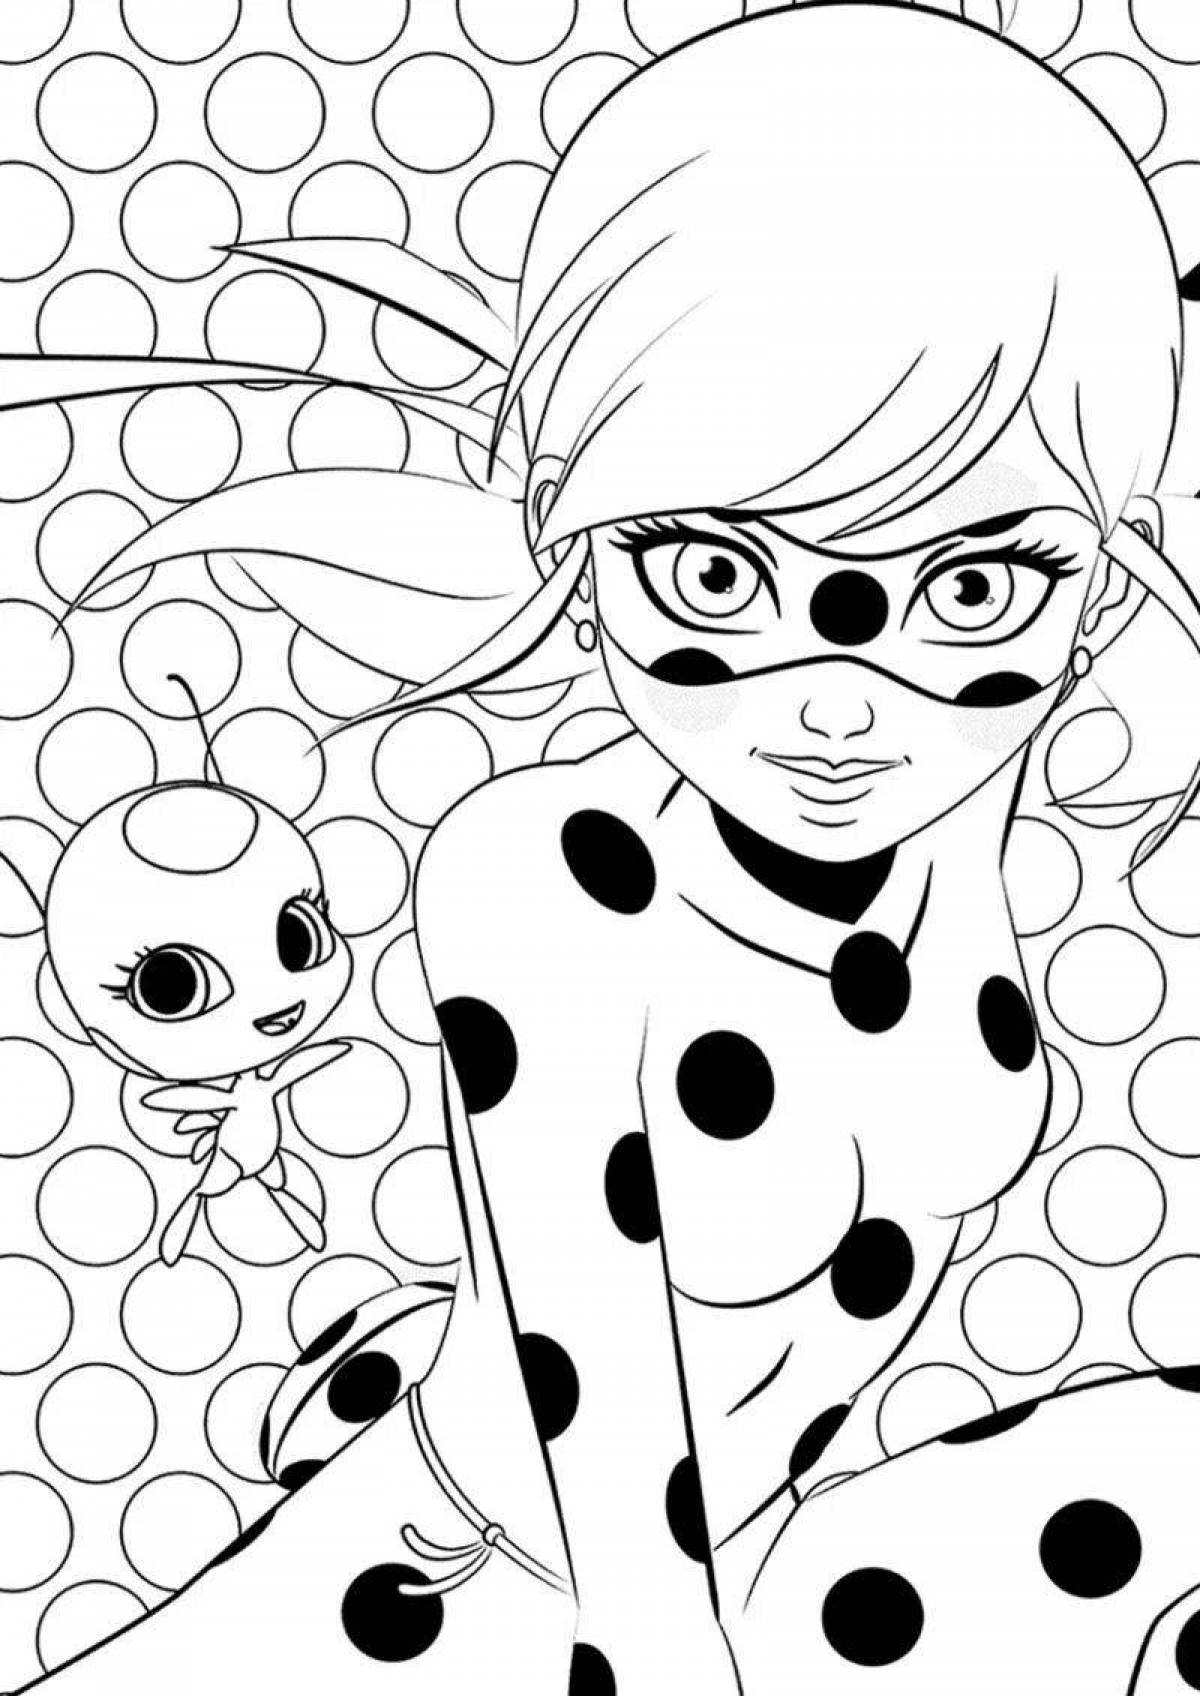 Coloring playful lady bug doll